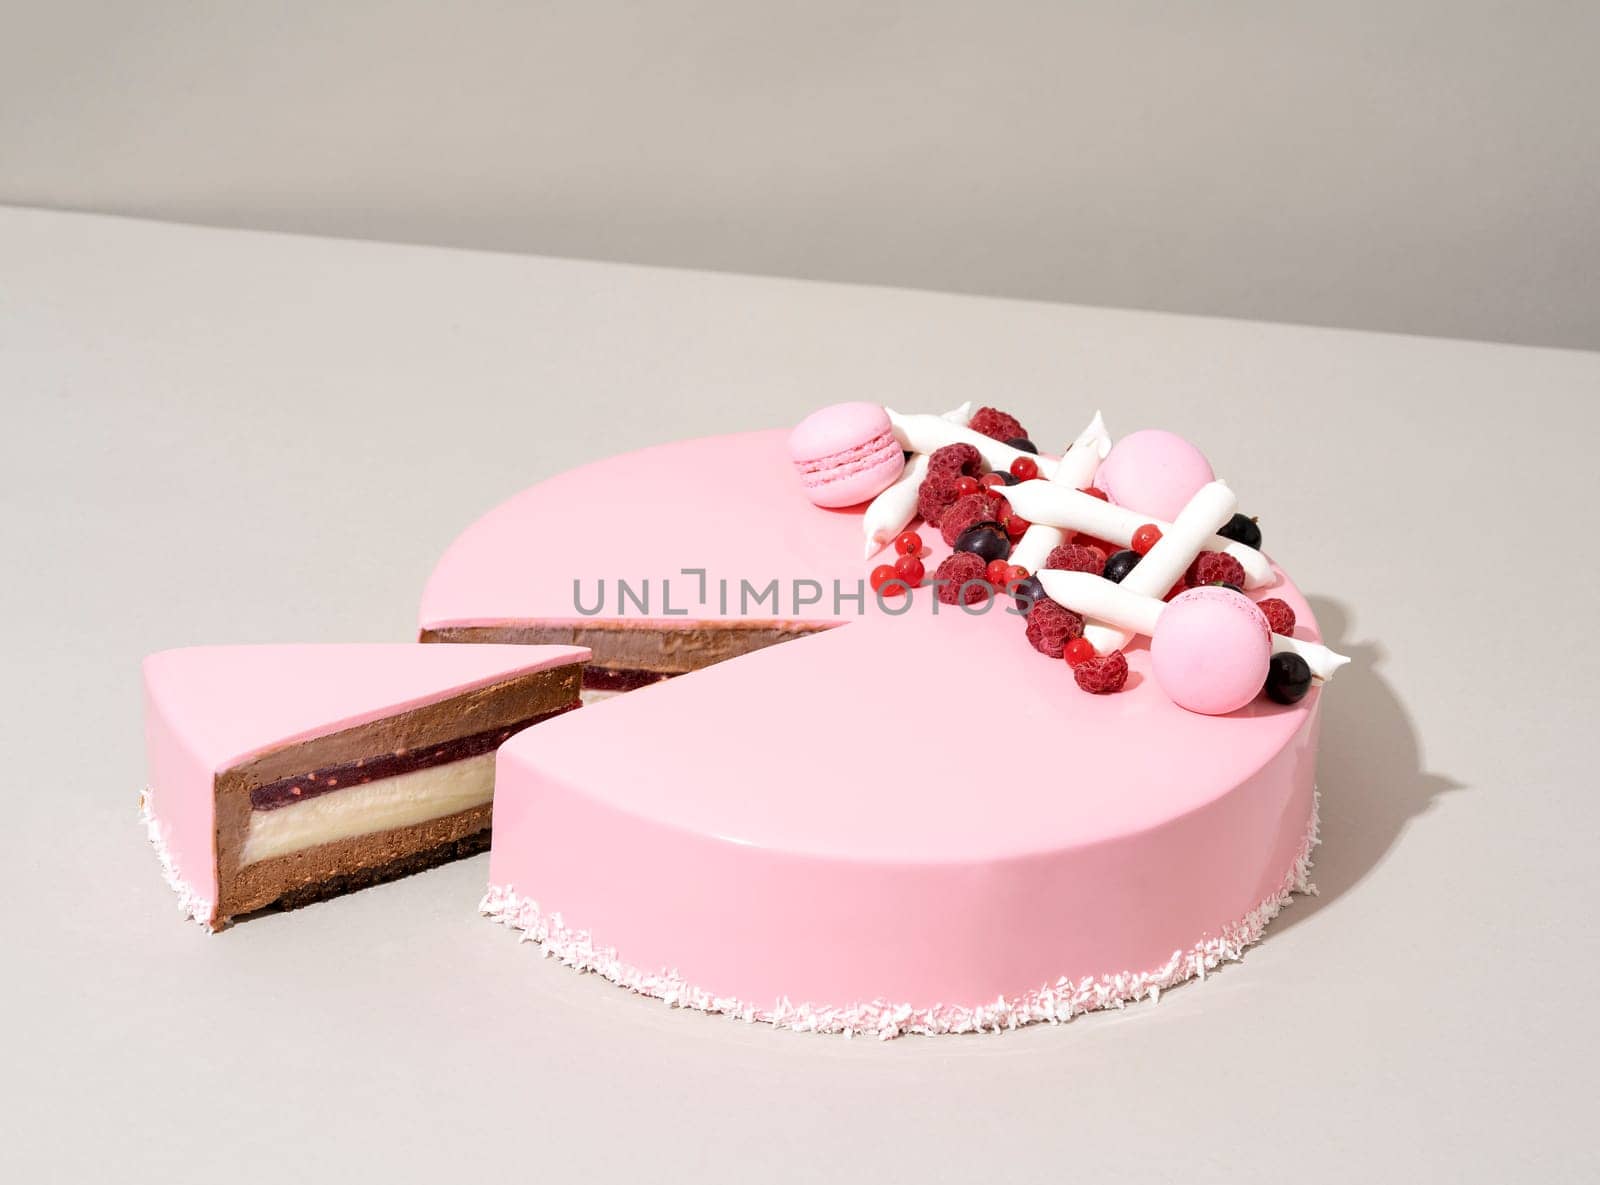 A close-up shot of a delectable cake featuring a raspberry and white chocolate topping